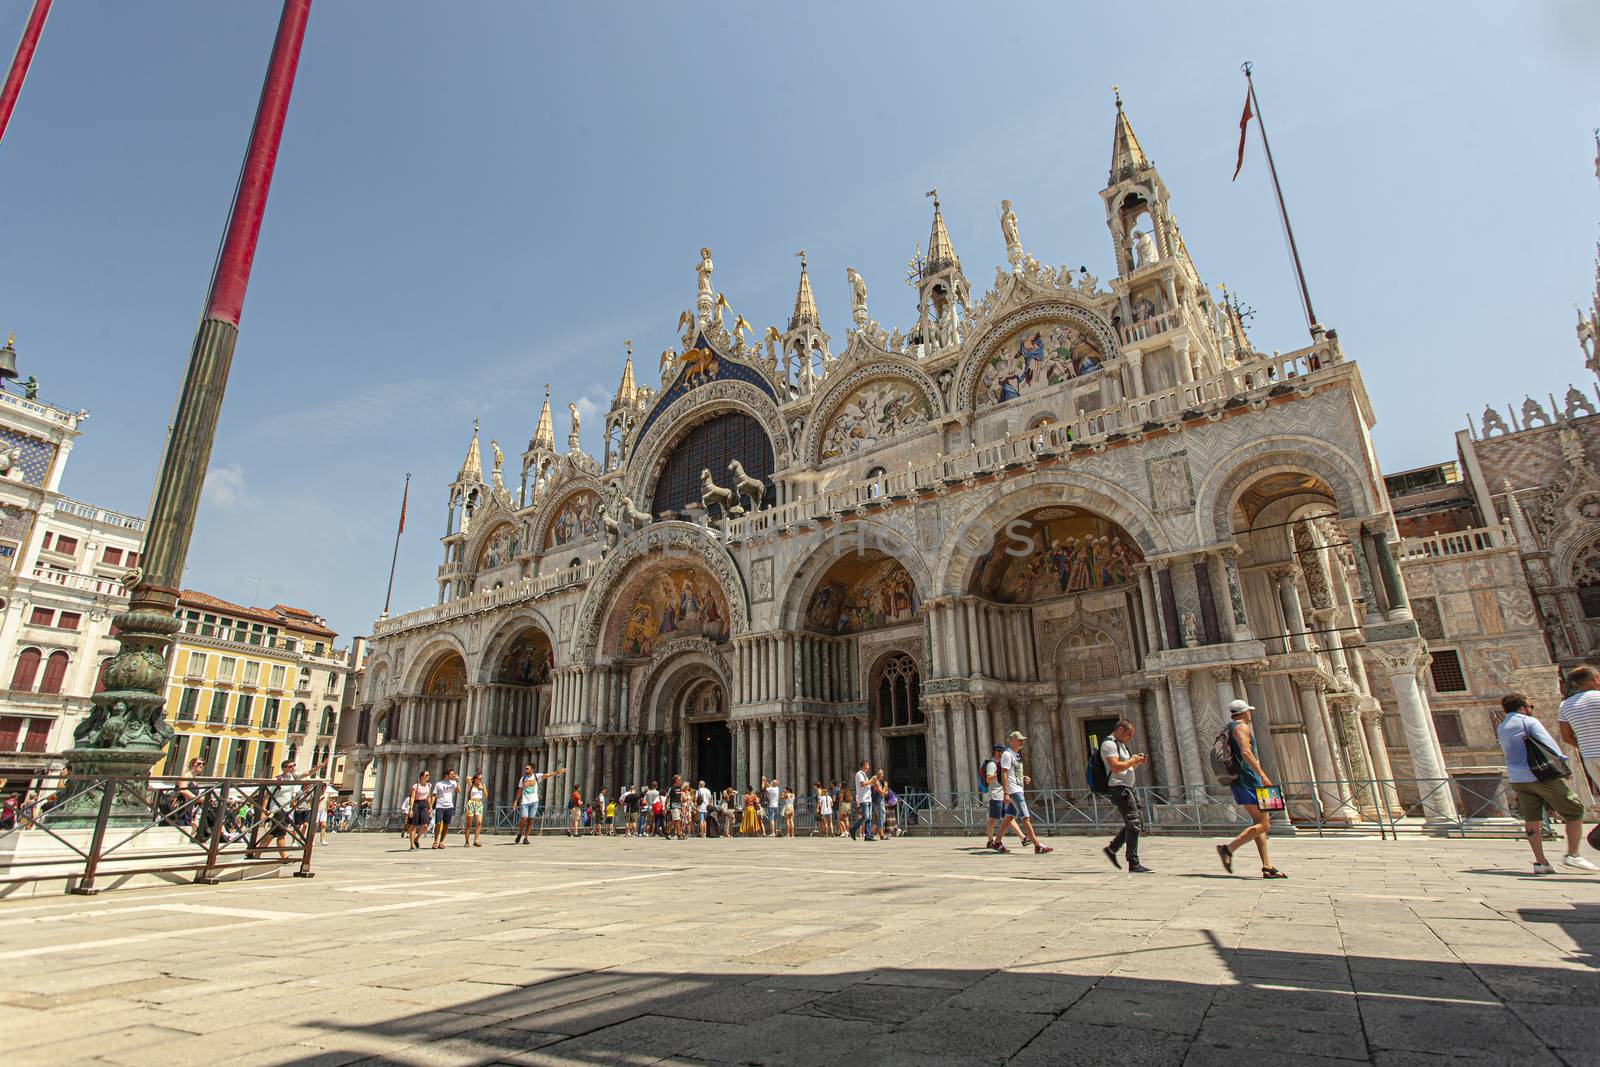 VENICE, ITALY 2 JULY 2020: Saint Mark cathedral in Venice with people